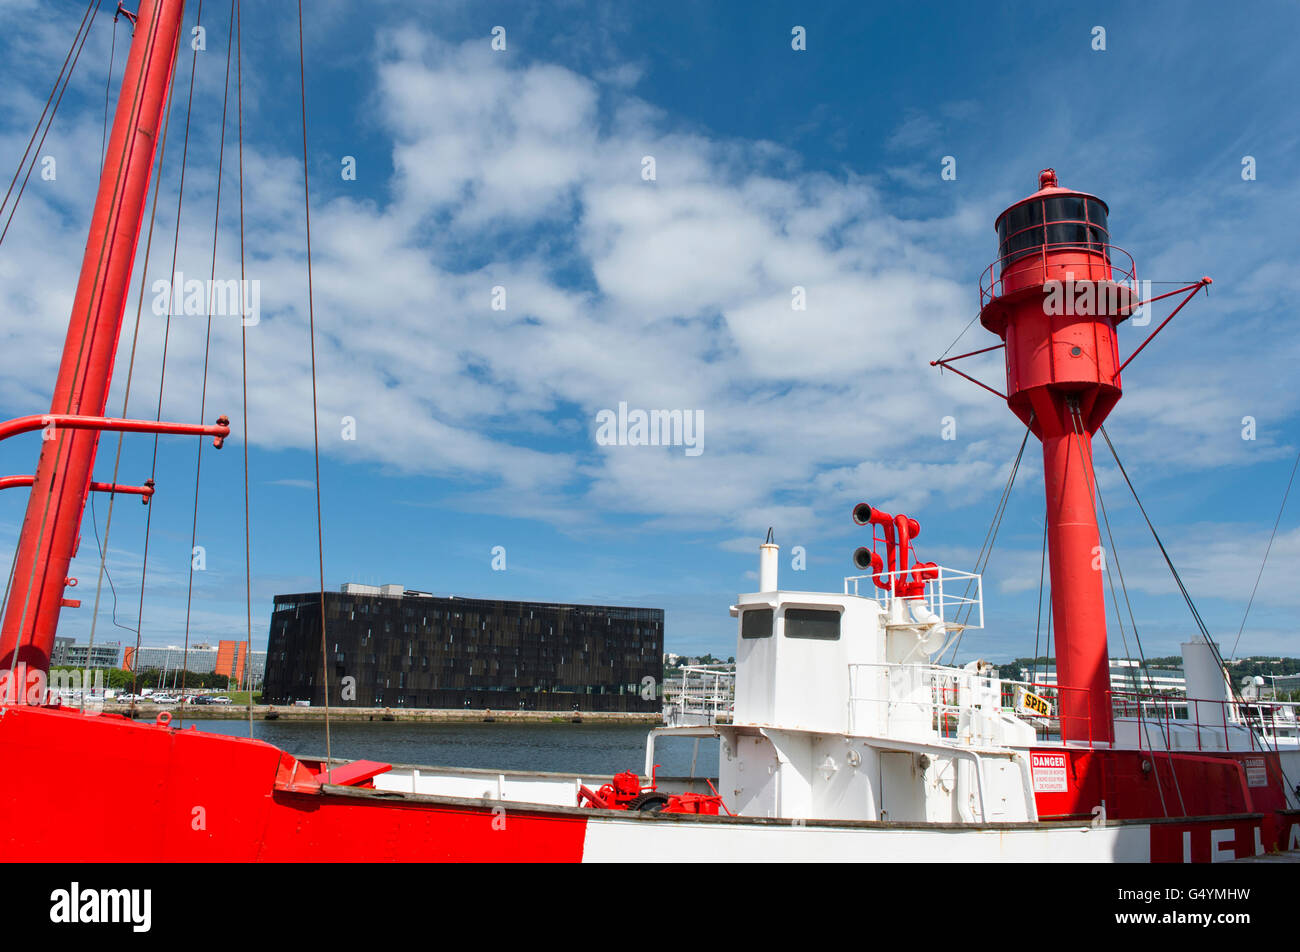 Out-of-service light vessel and the black block of the maritime school, Le Havre, Normandy, France Stock Photo